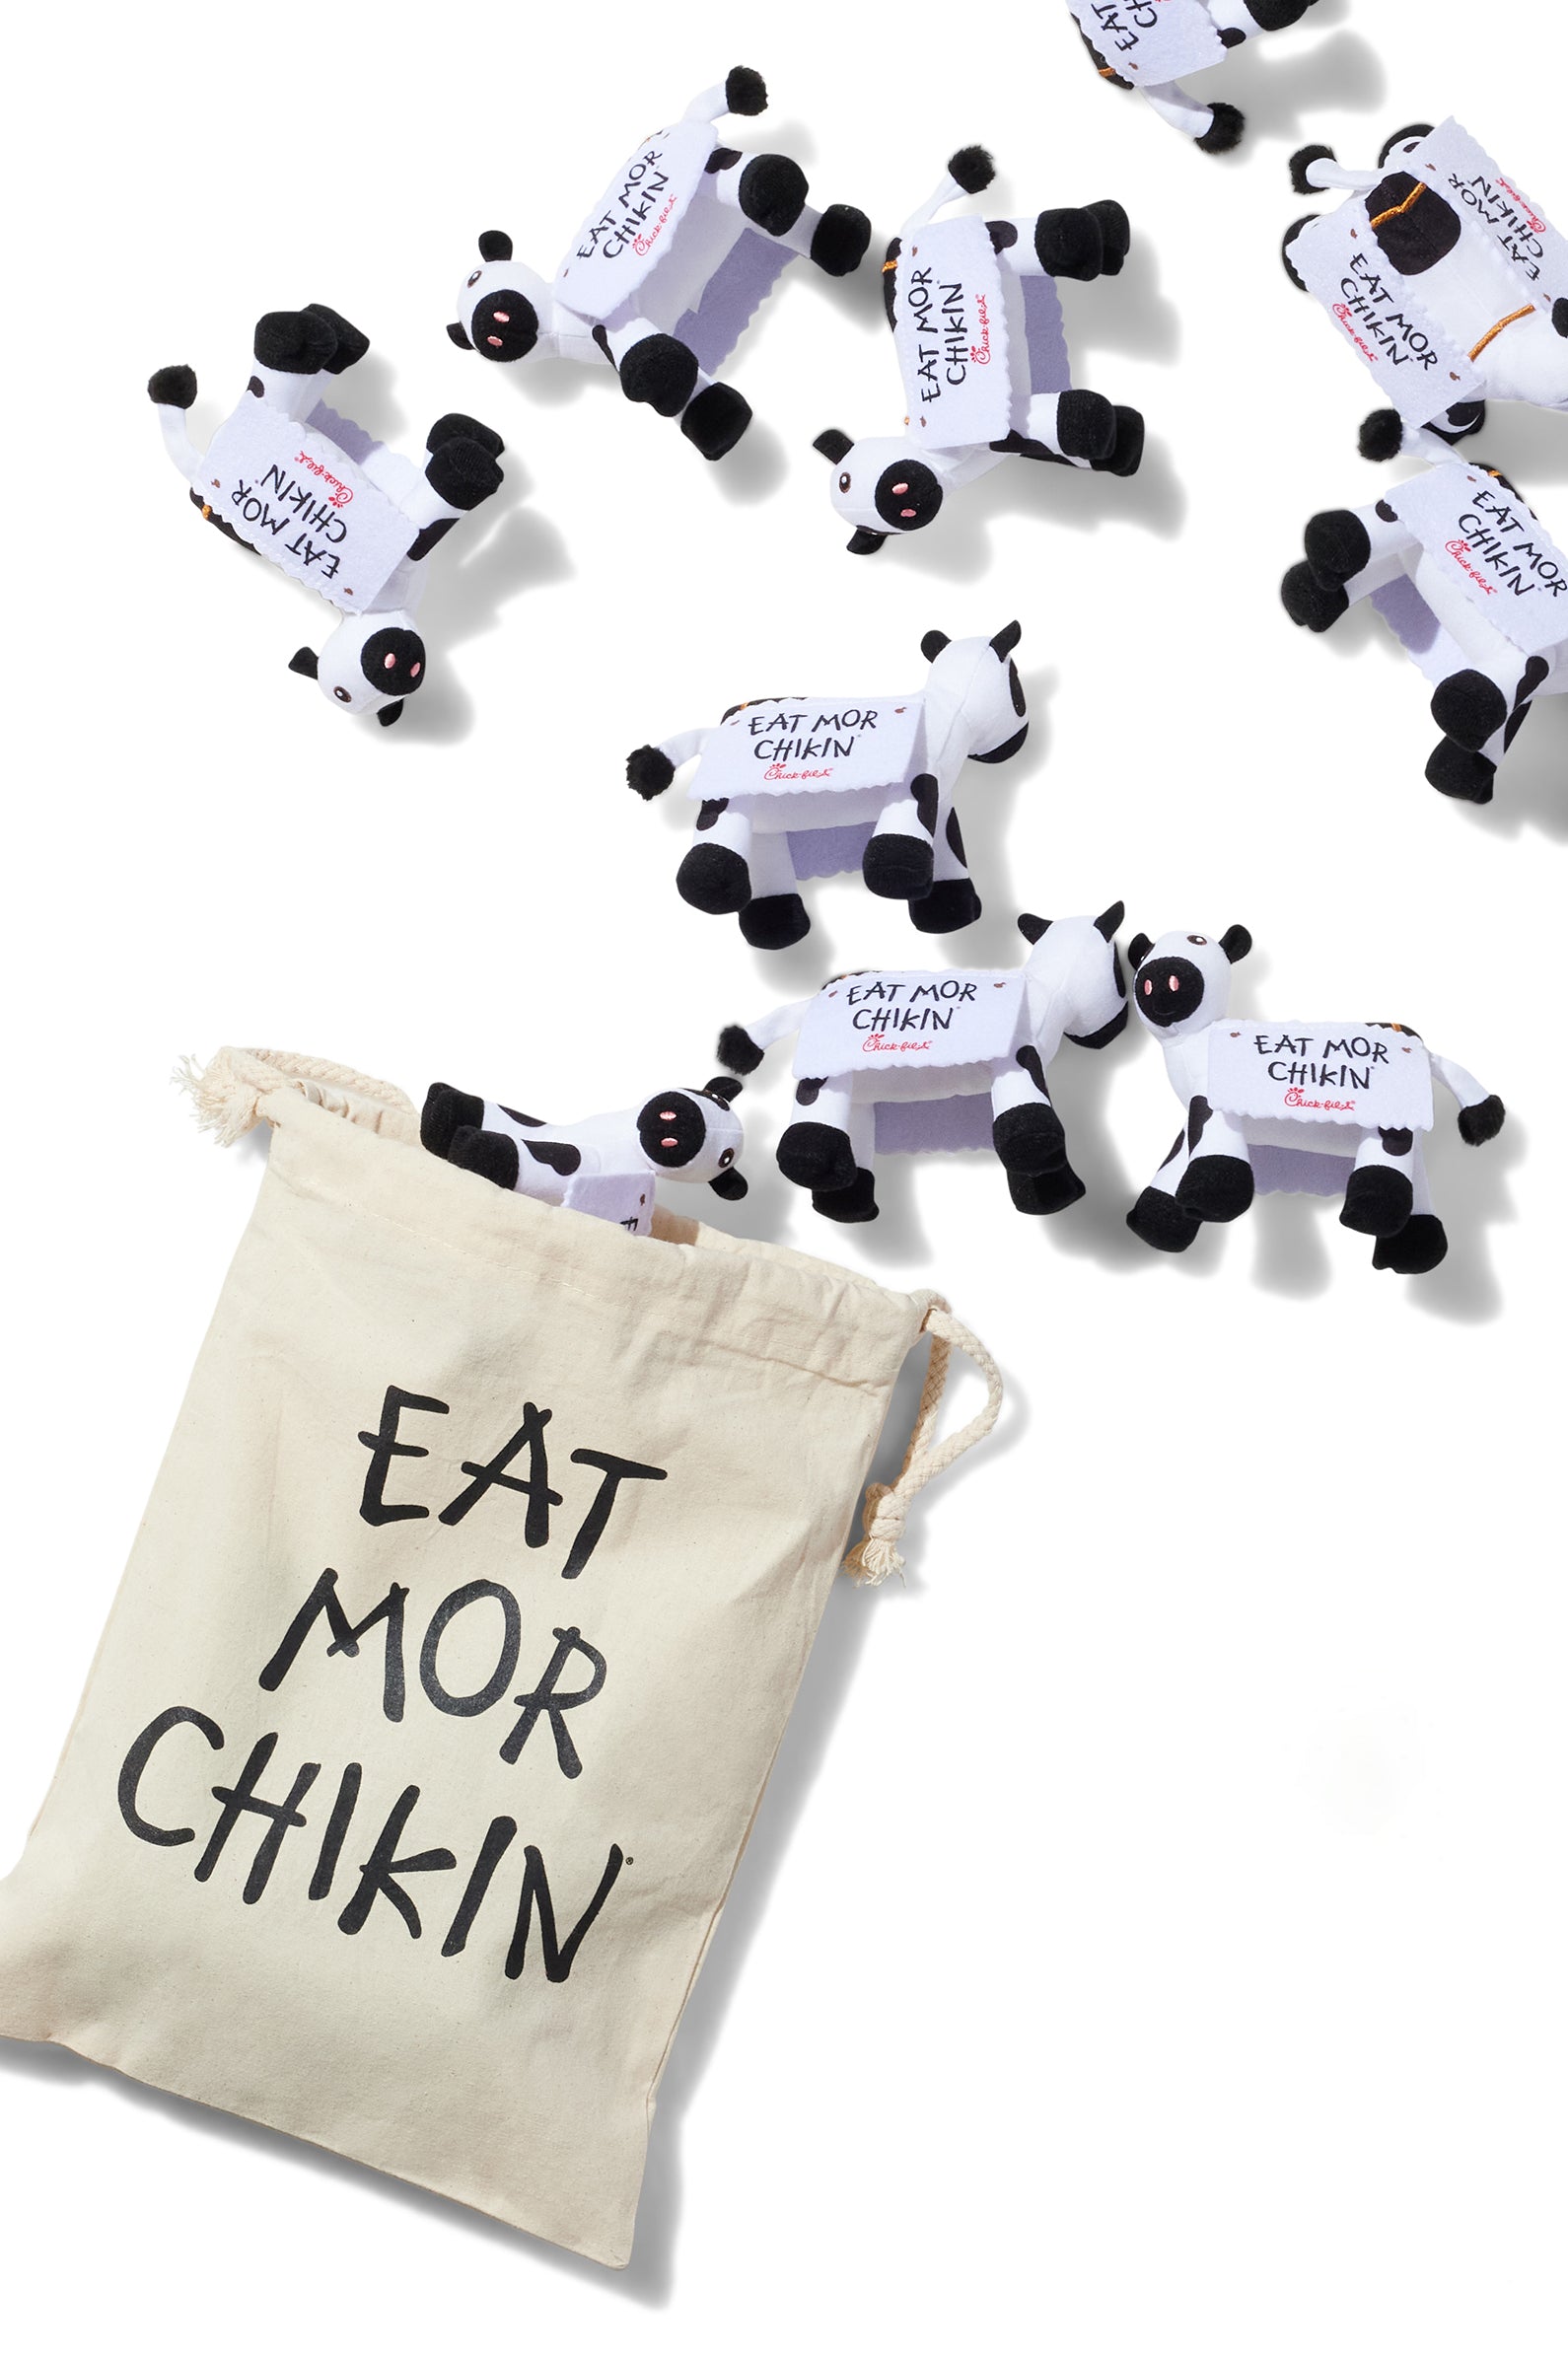 Several mini plush cows with a bag displaying their &quot;Eat Mor Chikin&quot; message from the Shareable Bag of Cows set